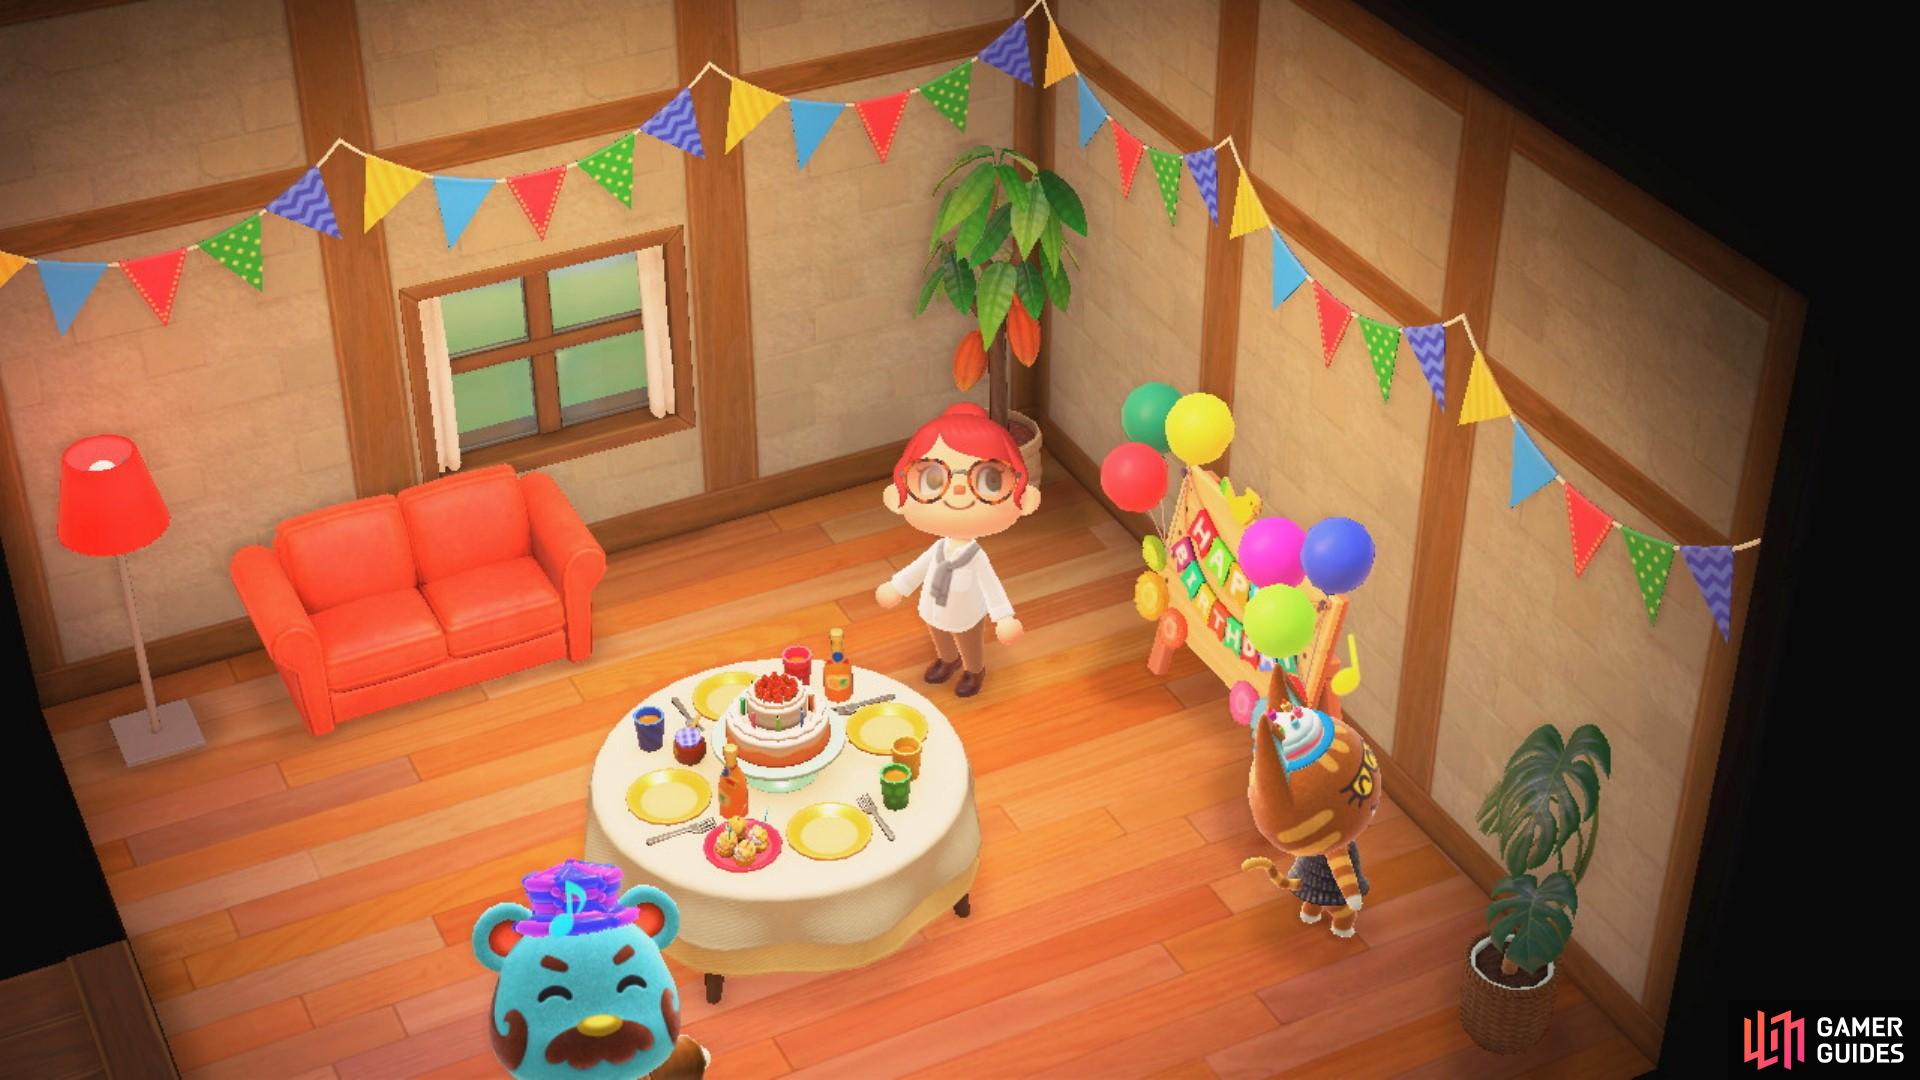 Make sure you attend your villagers’ birthday parties!